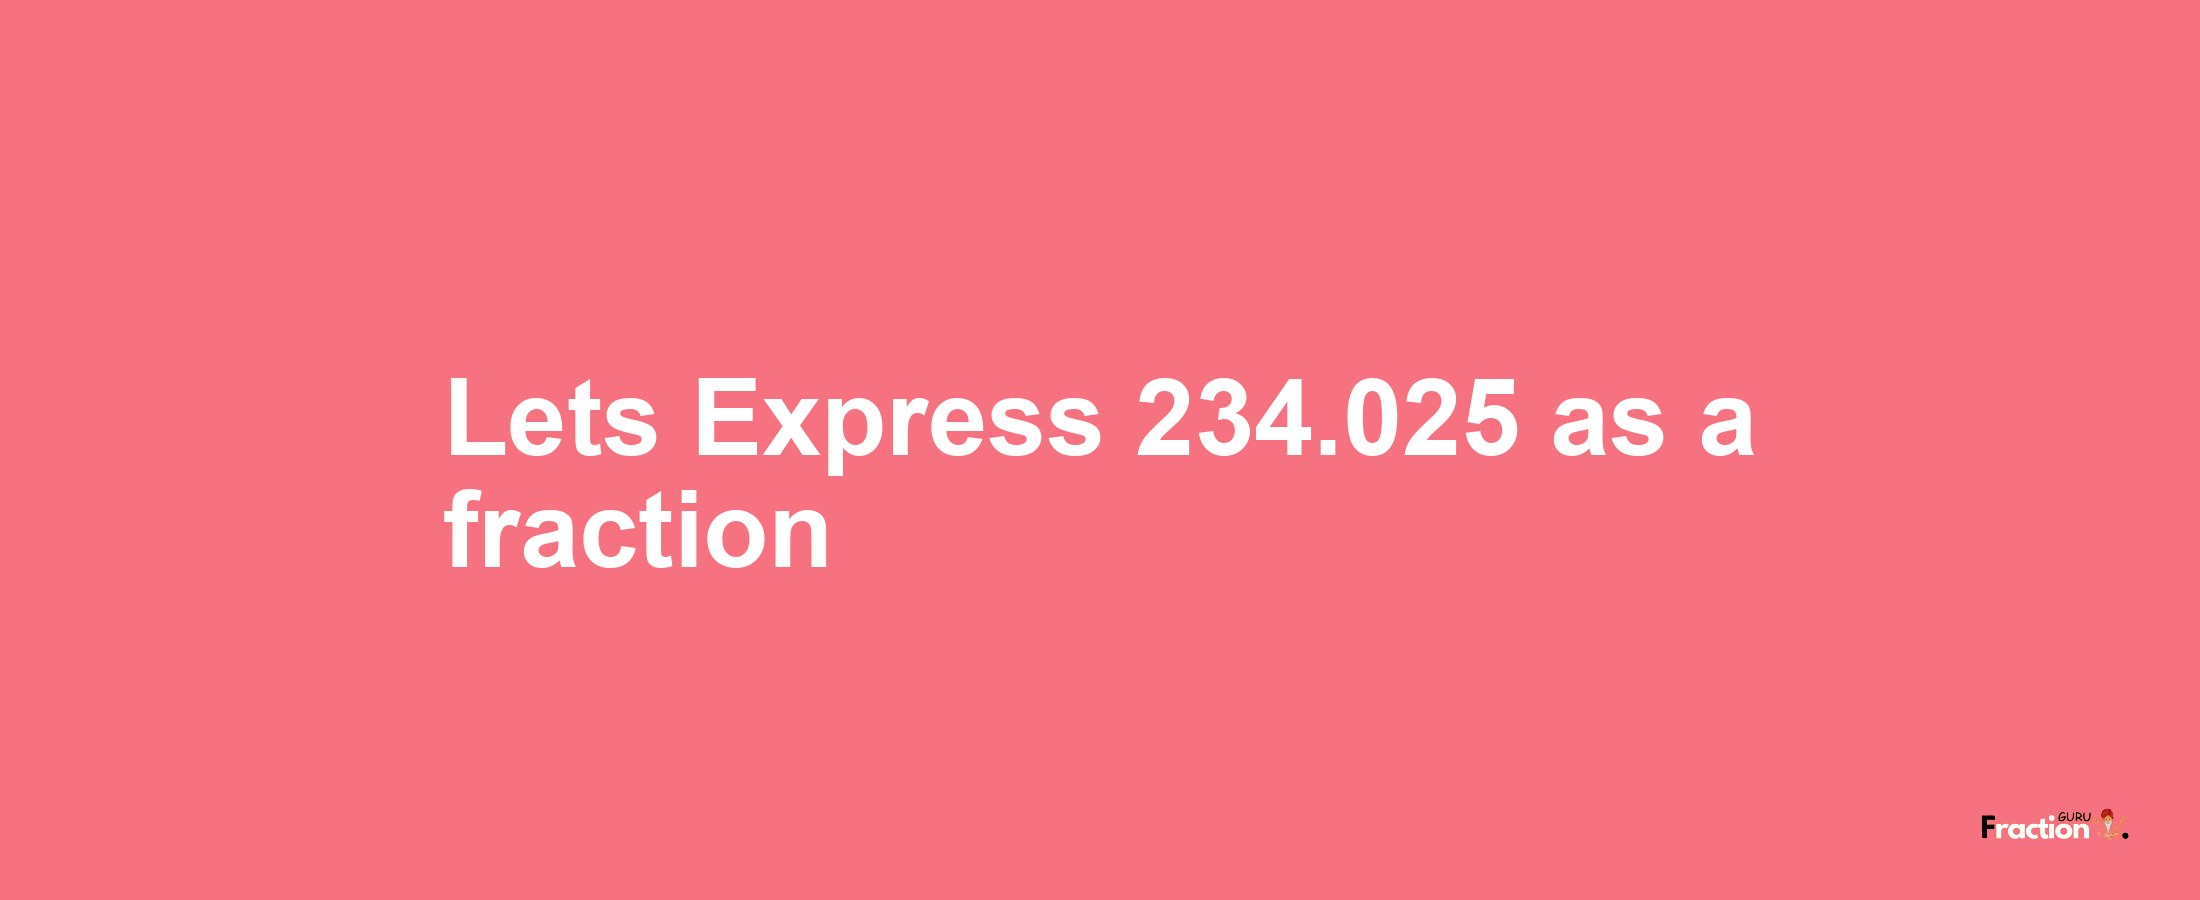 Lets Express 234.025 as afraction